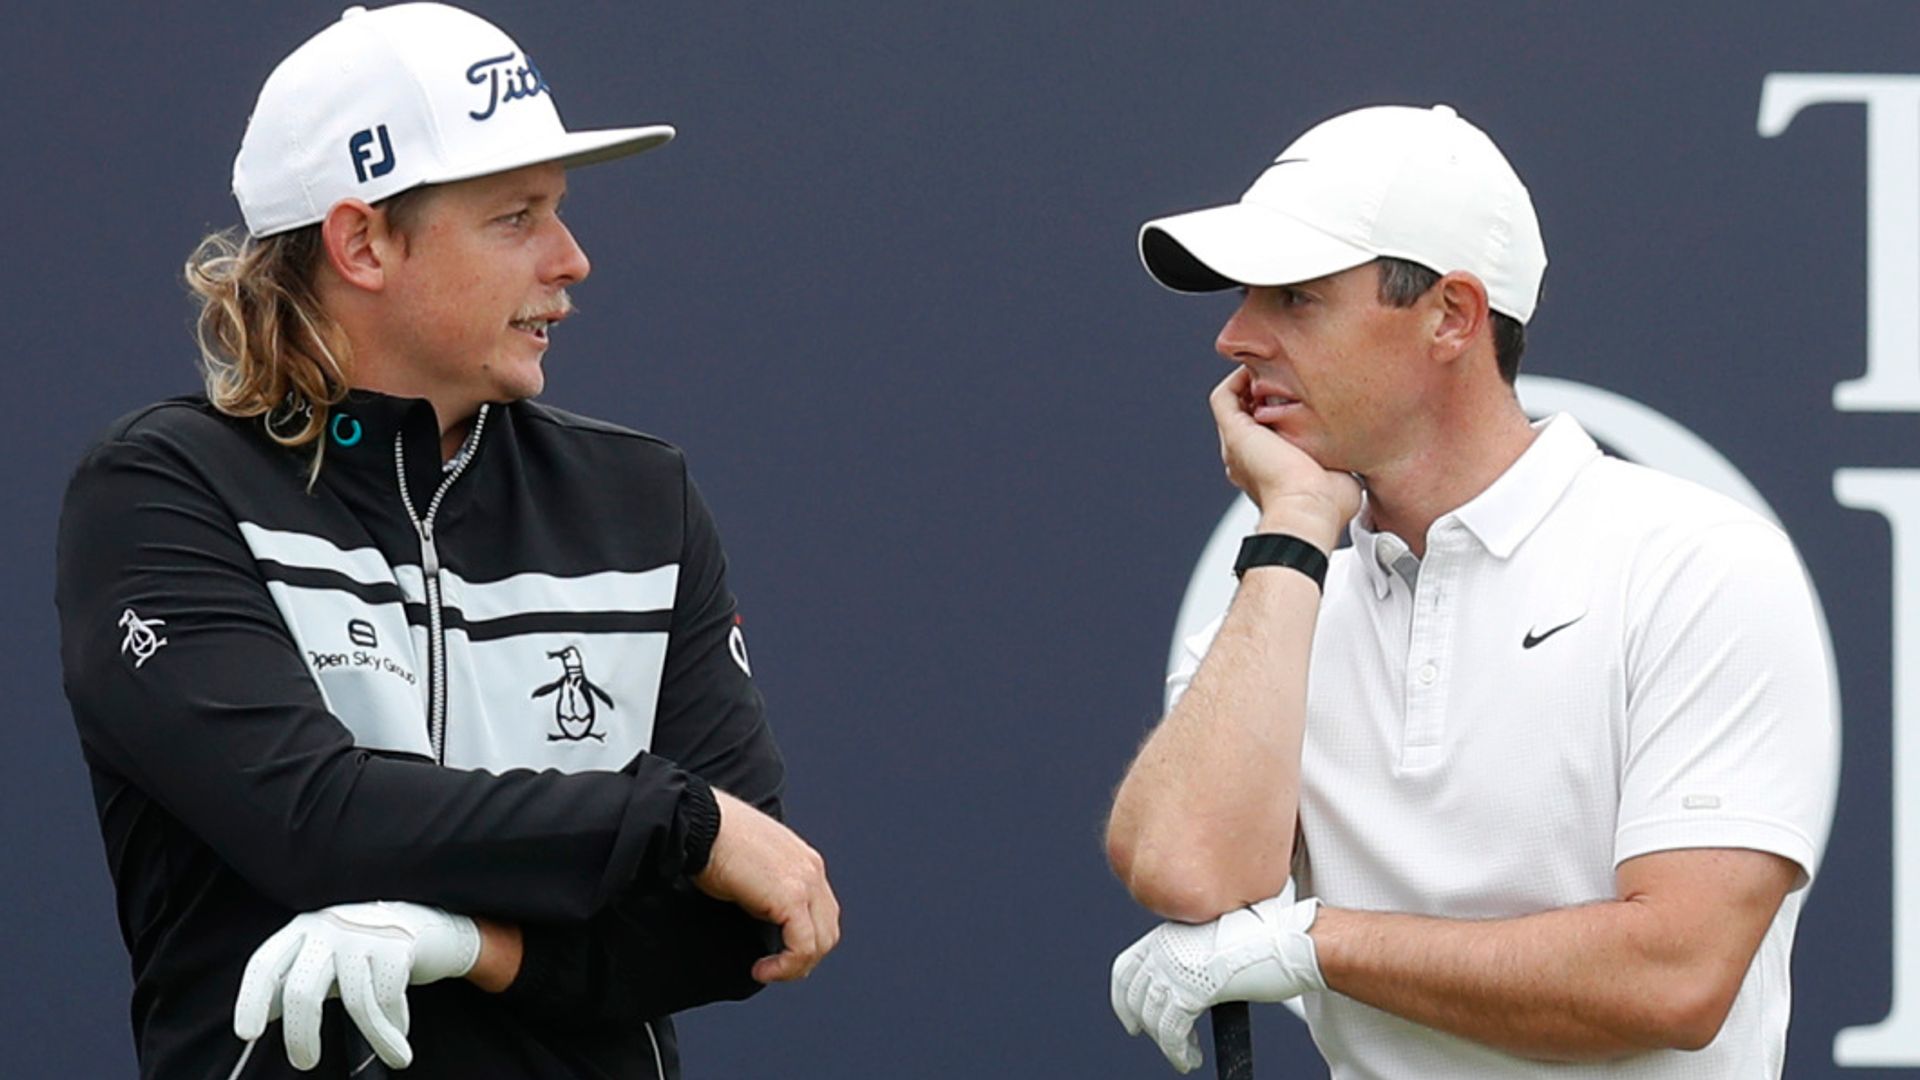 McIlroy's drought, LIV rumours & what now for Tiger? The Open talking points